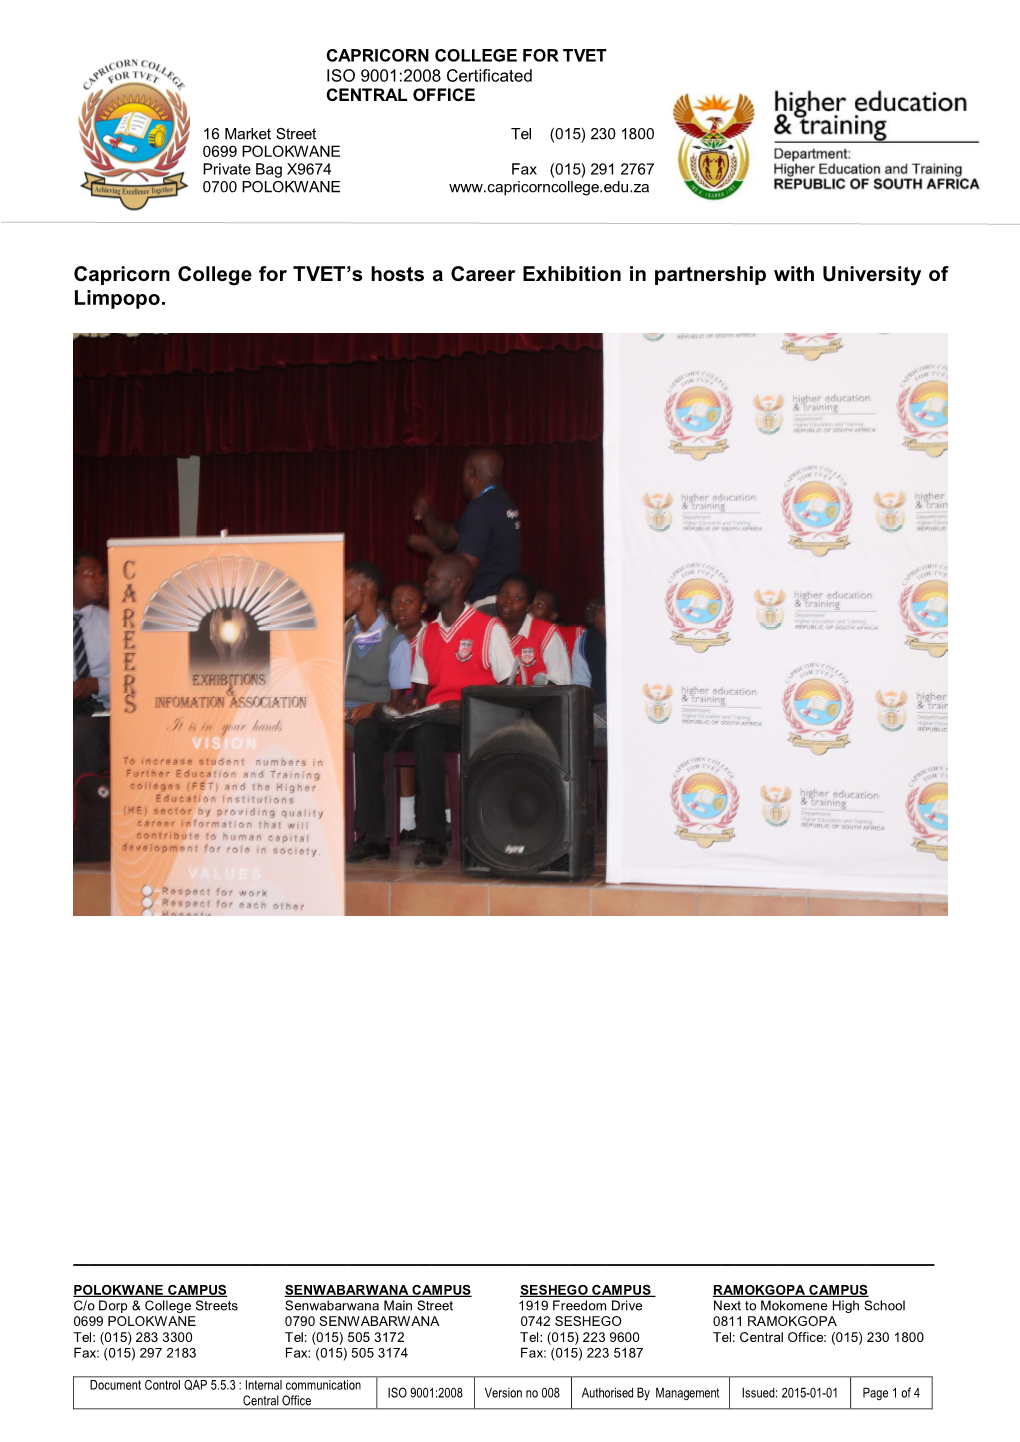 Capricorn College for TVET's Hosts a Career Exhibition in Partnership